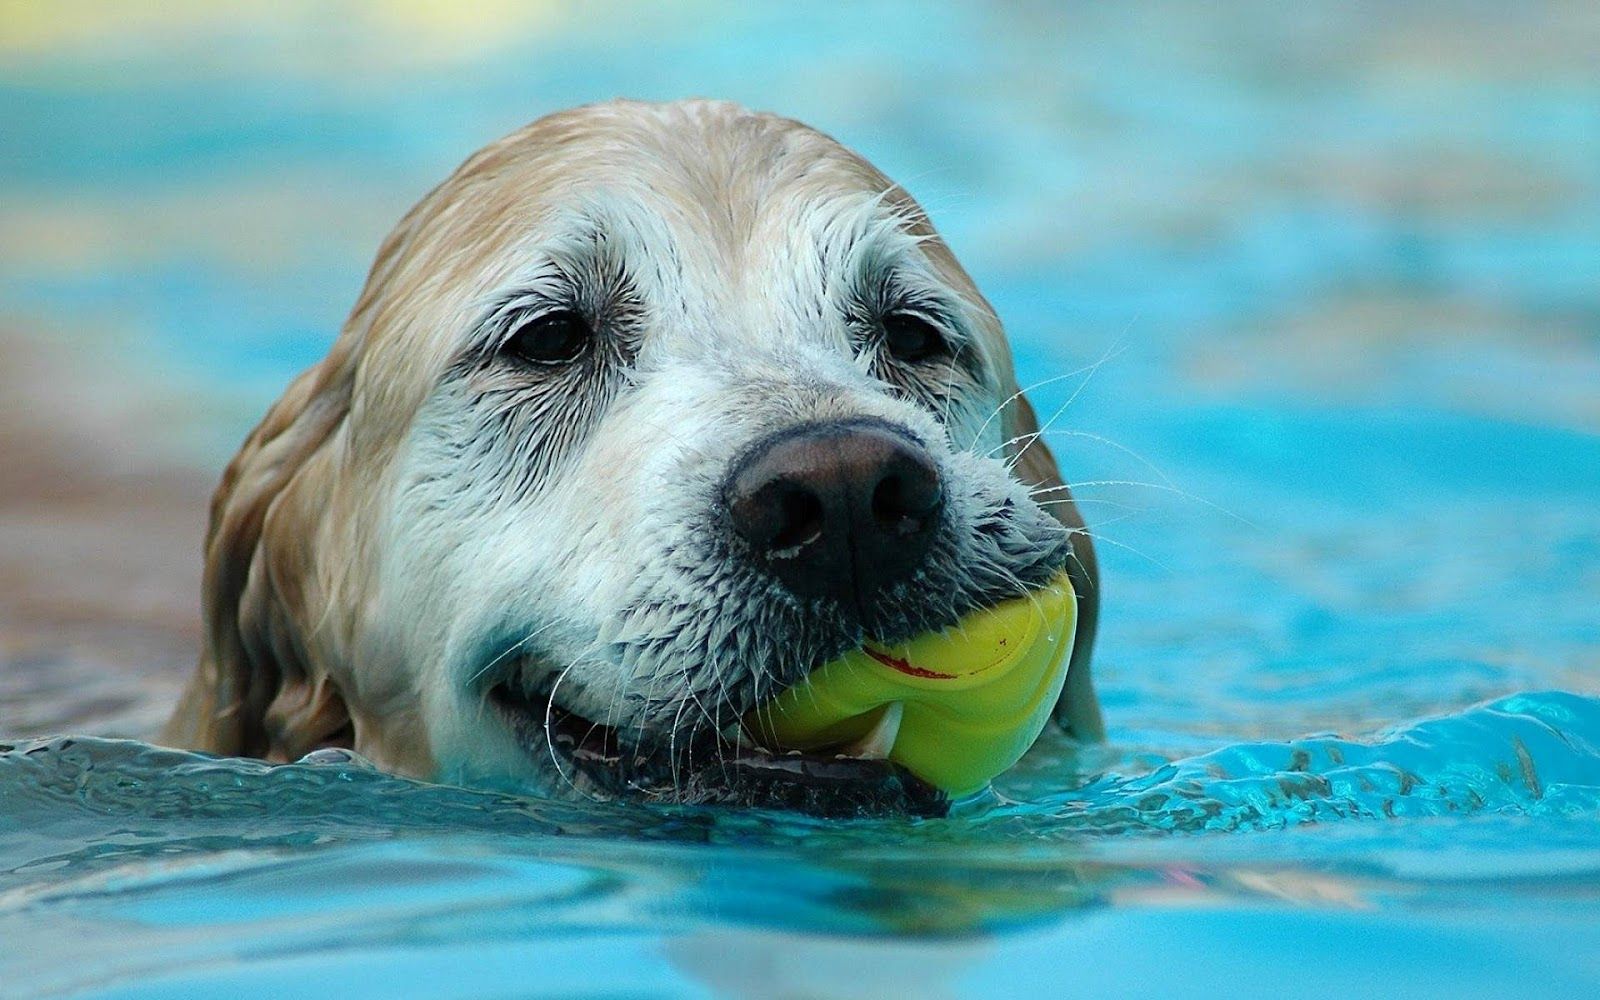 Wallpaper Joo: Picture of dog with ball in water